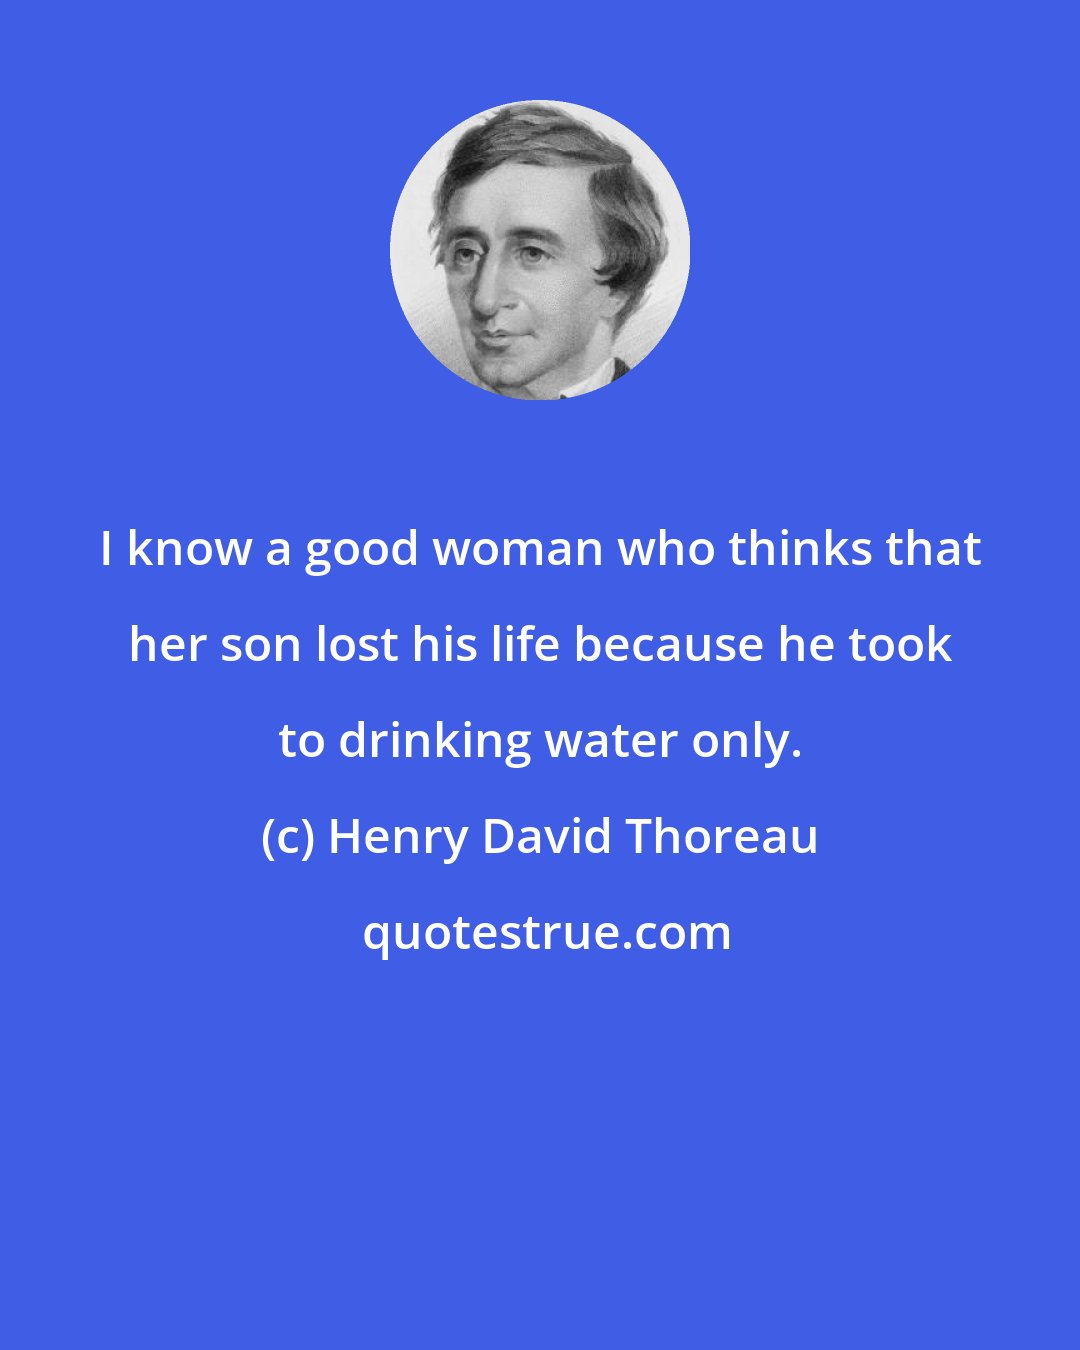 Henry David Thoreau: I know a good woman who thinks that her son lost his life because he took to drinking water only.